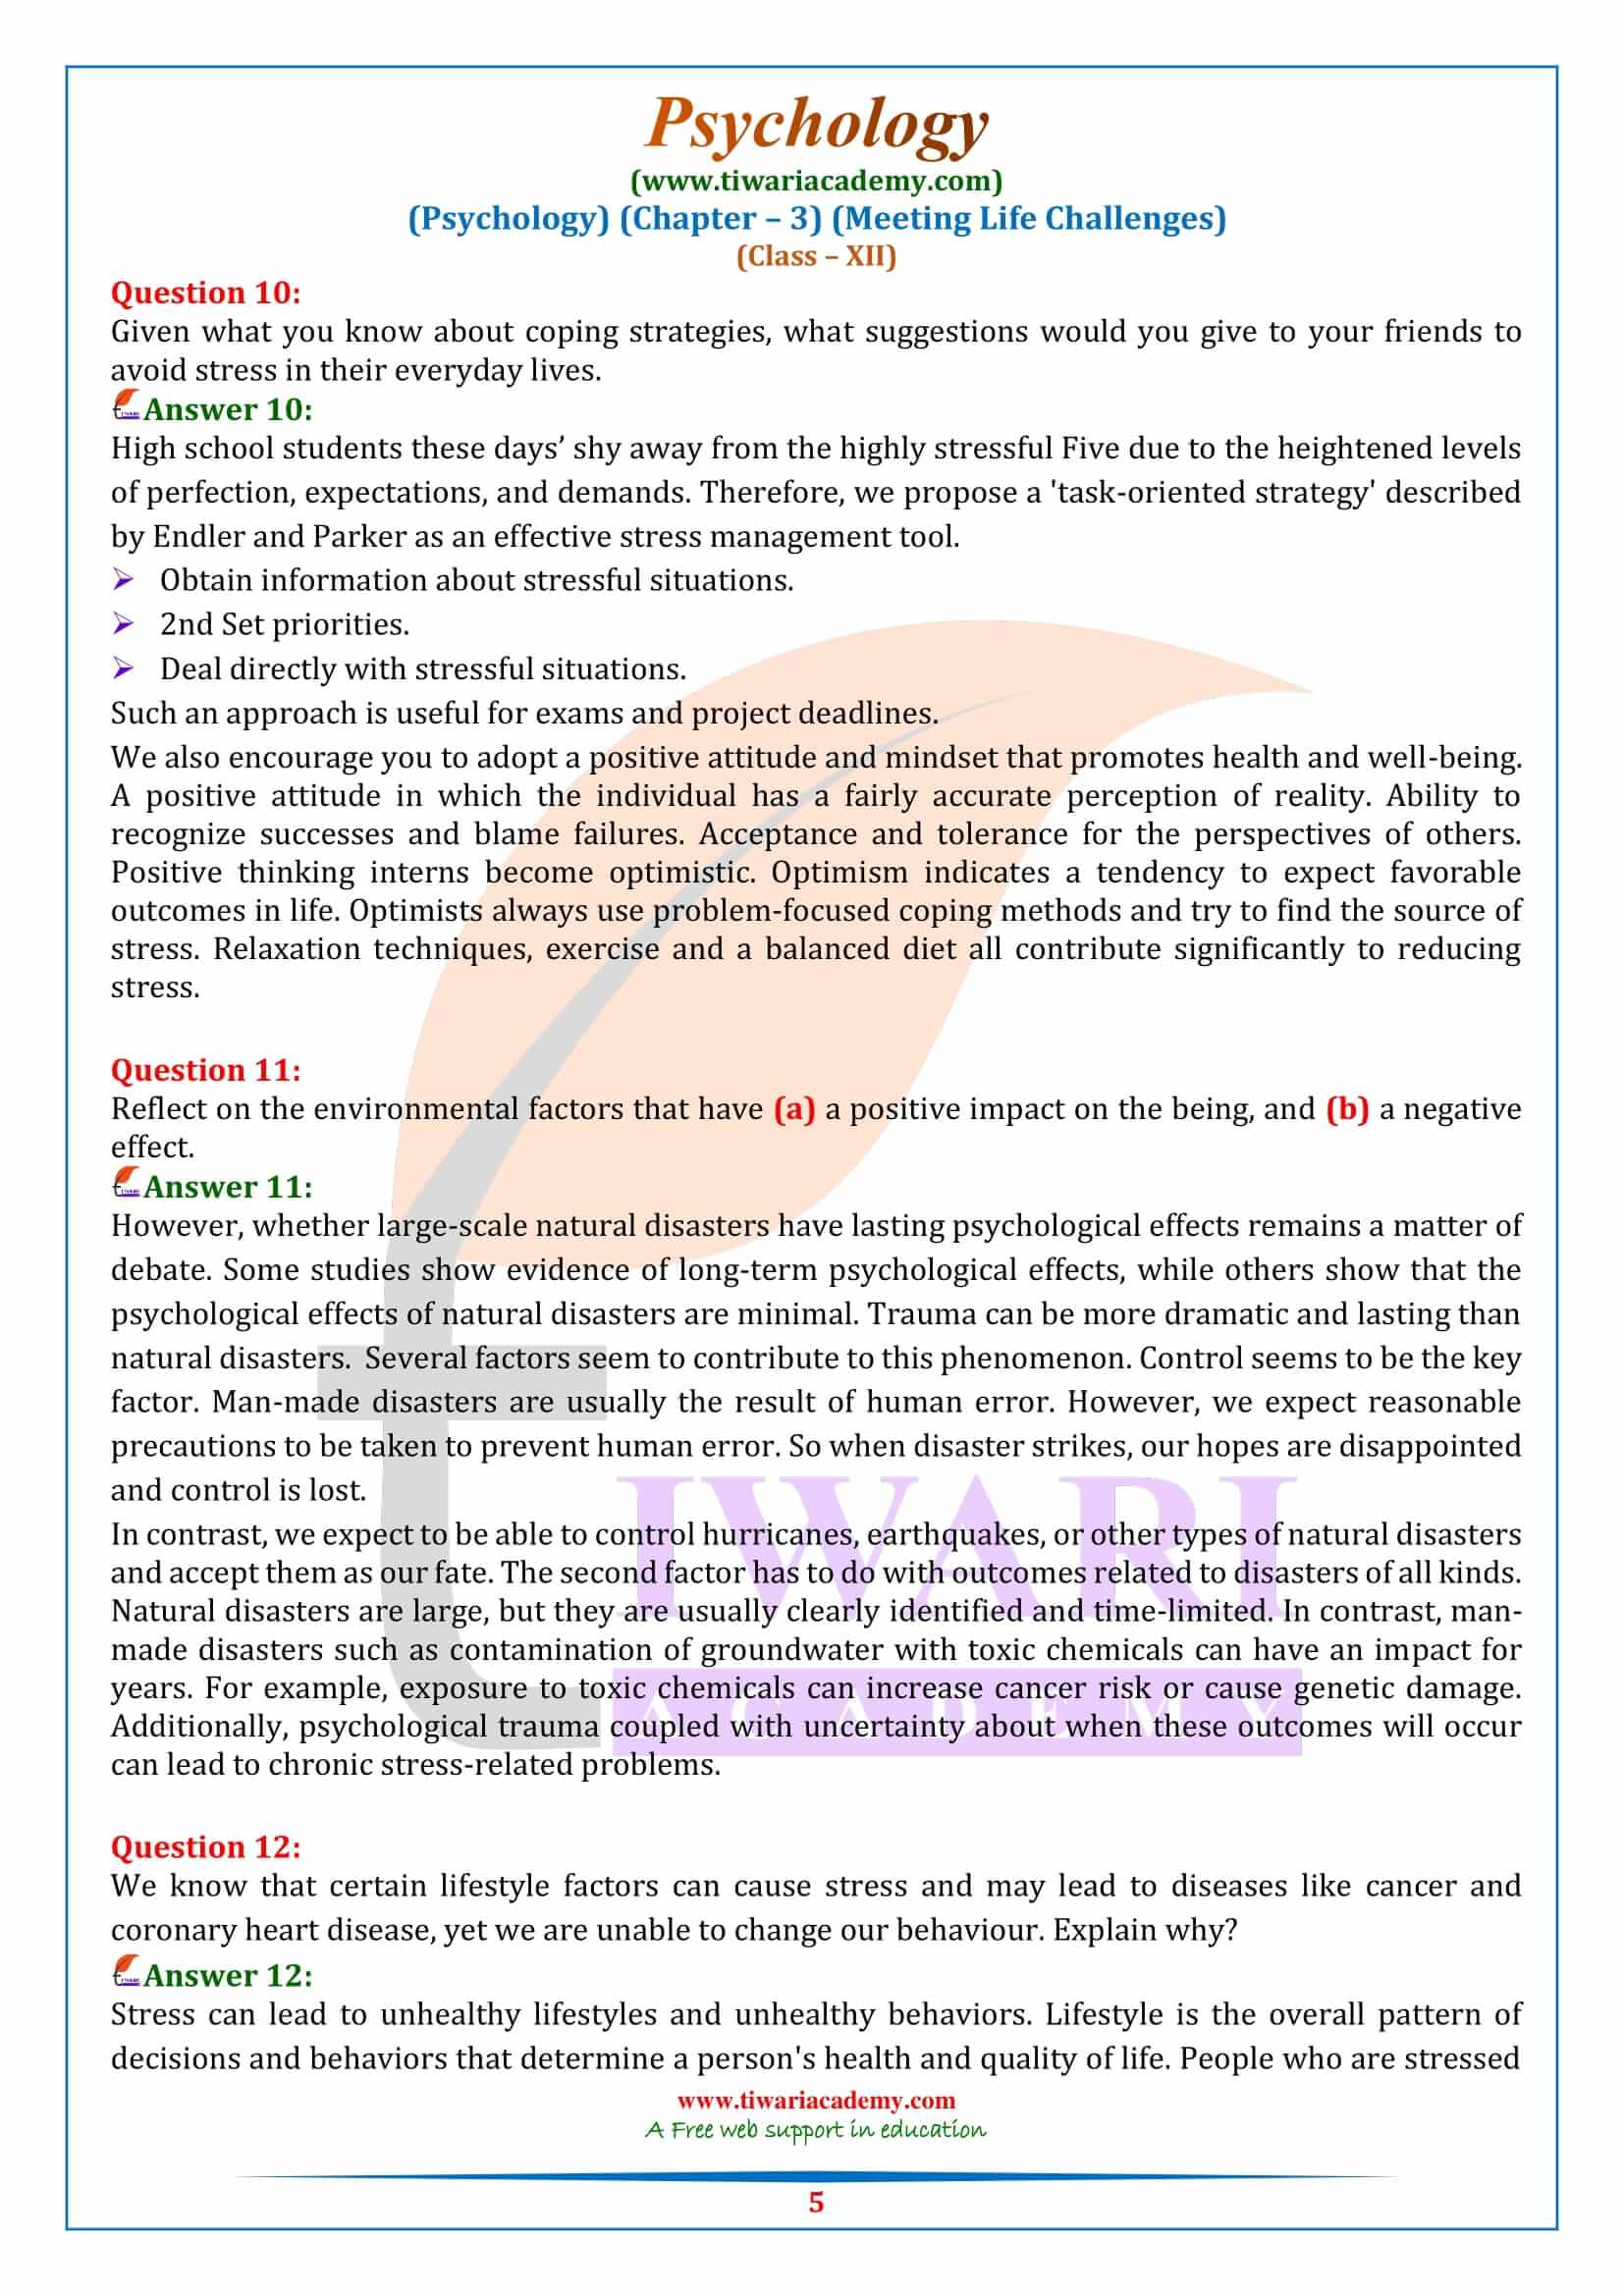 NCERT Solutions for Class 12 Psychology Chapter 3 in English Medium